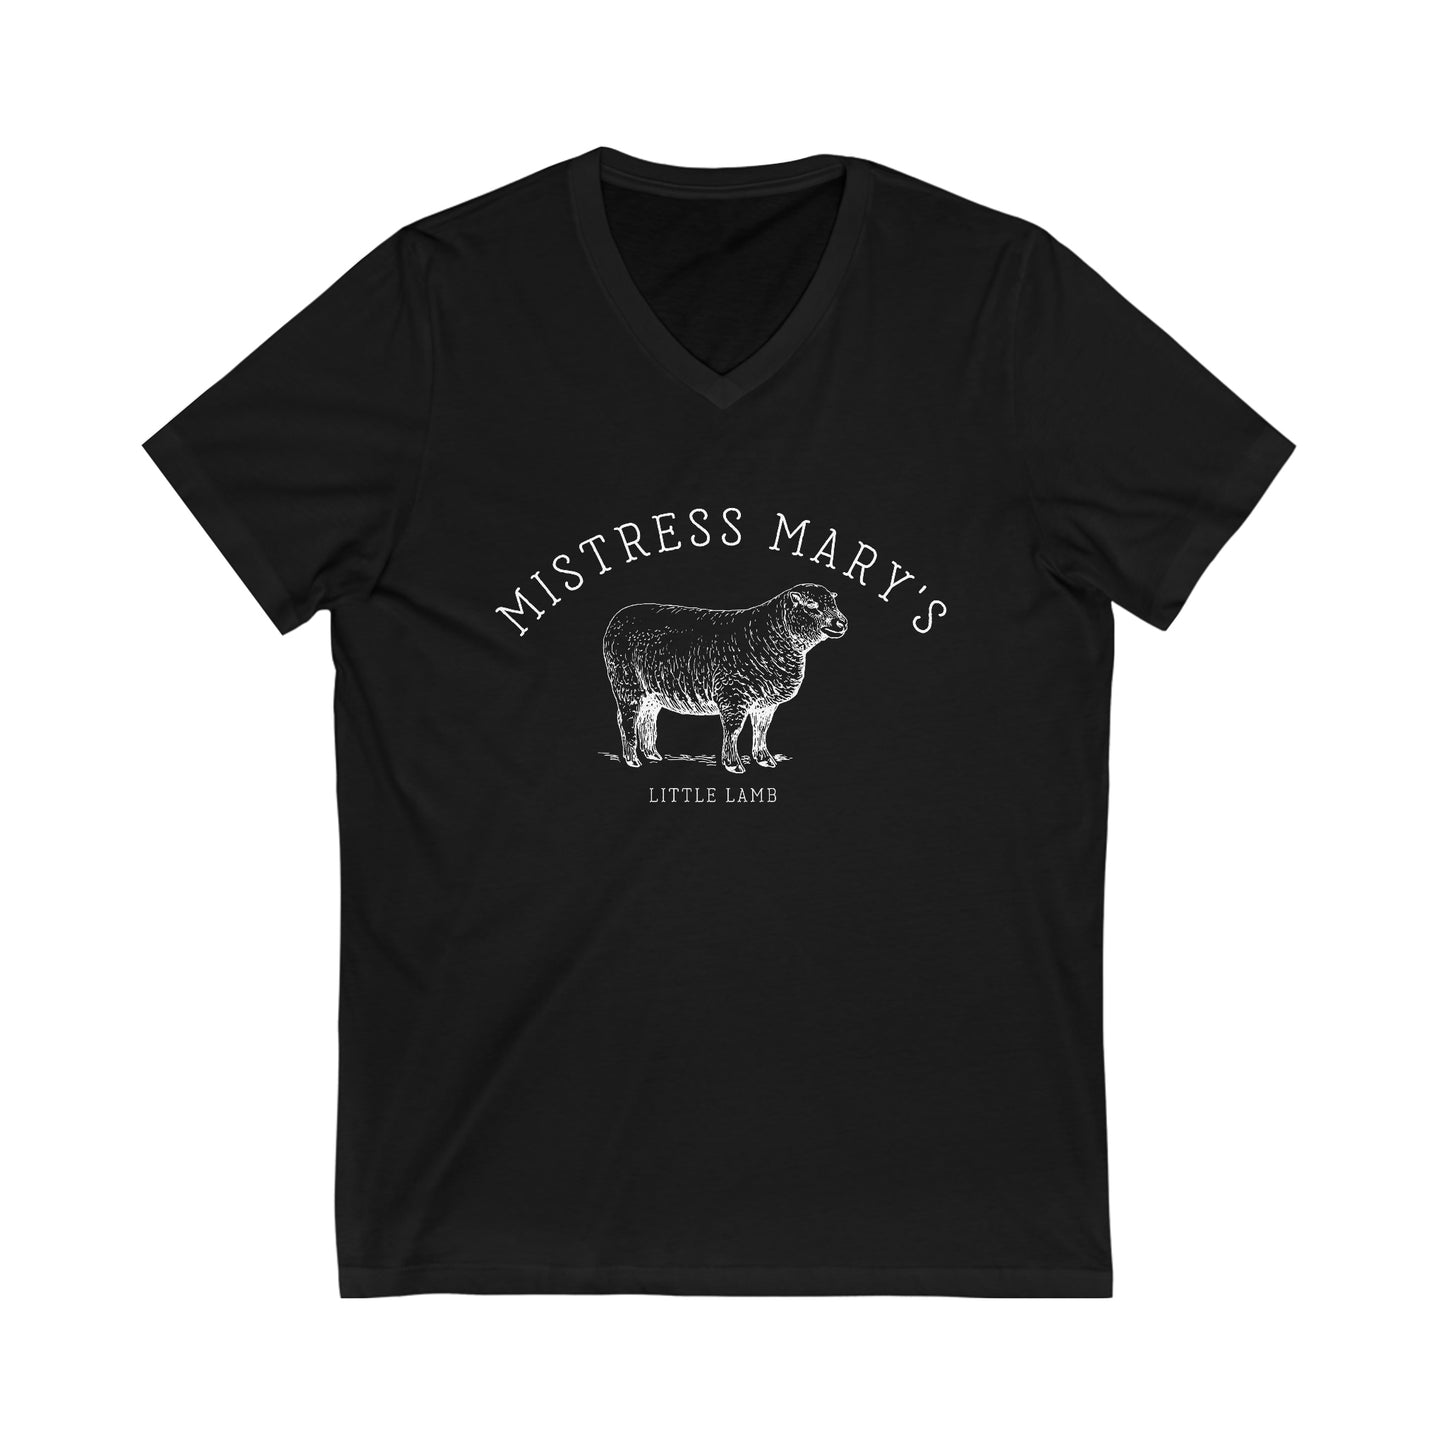 The little lamb | Relaxed Fit V-Neck Tee